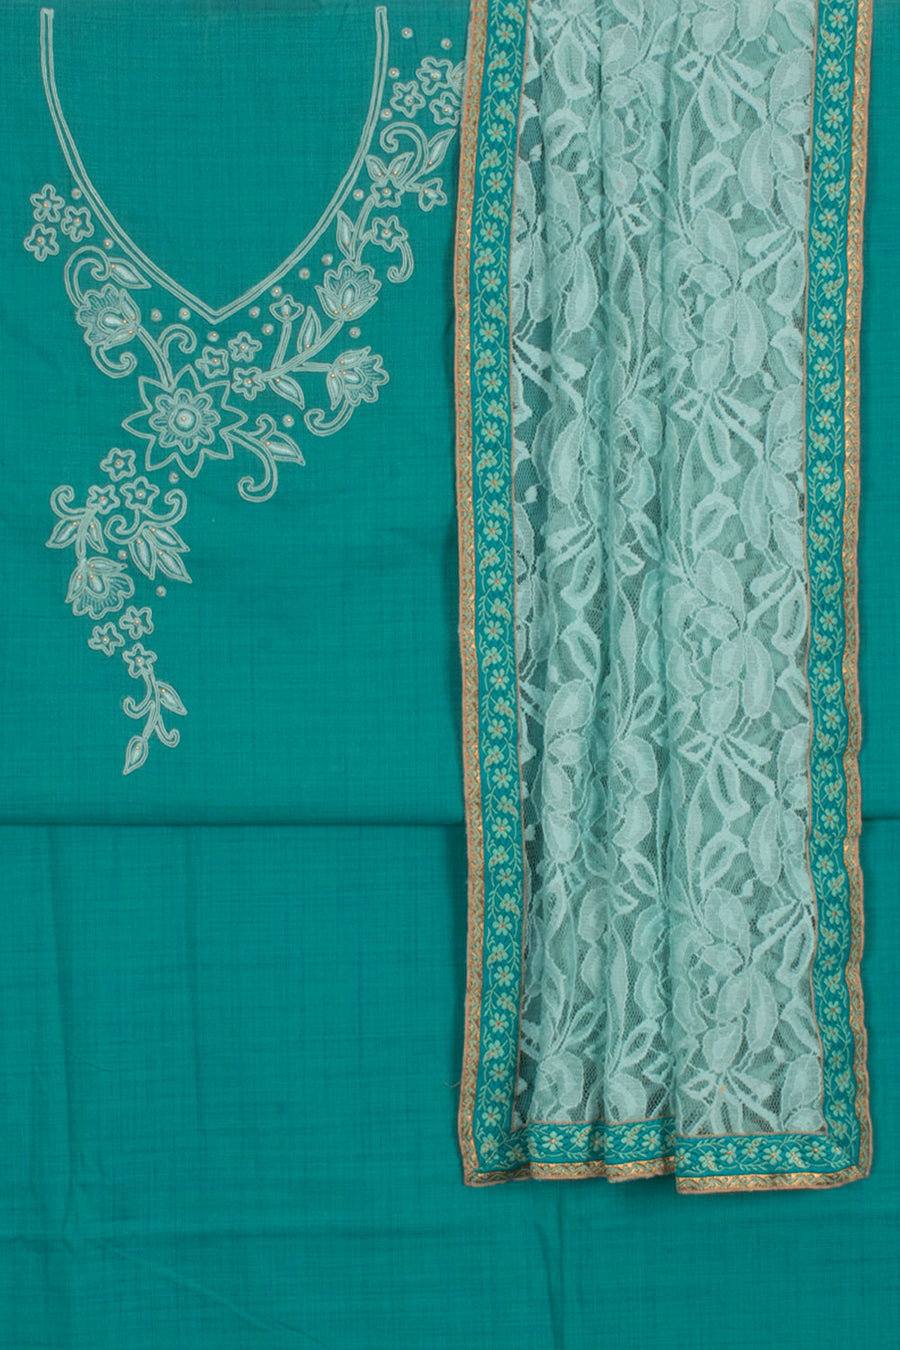 Hand Embroidered Cotton 3-Piece Salwar Suit Material with Cord Embroidery Yoke and Parsi Work Net Dupatta